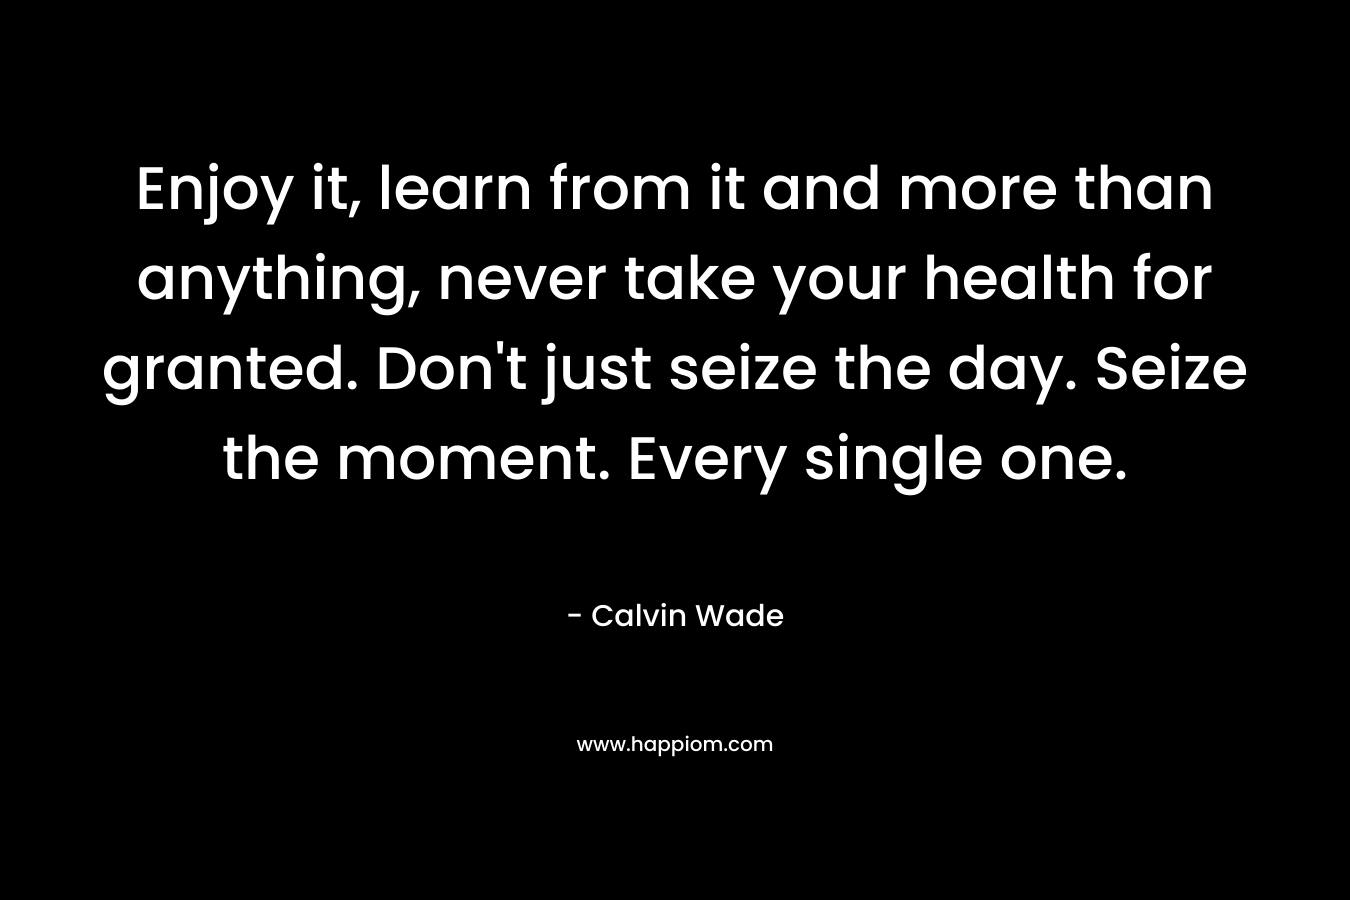 Enjoy it, learn from it and more than anything, never take your health for granted. Don’t just seize the day. Seize the moment. Every single one. – Calvin Wade